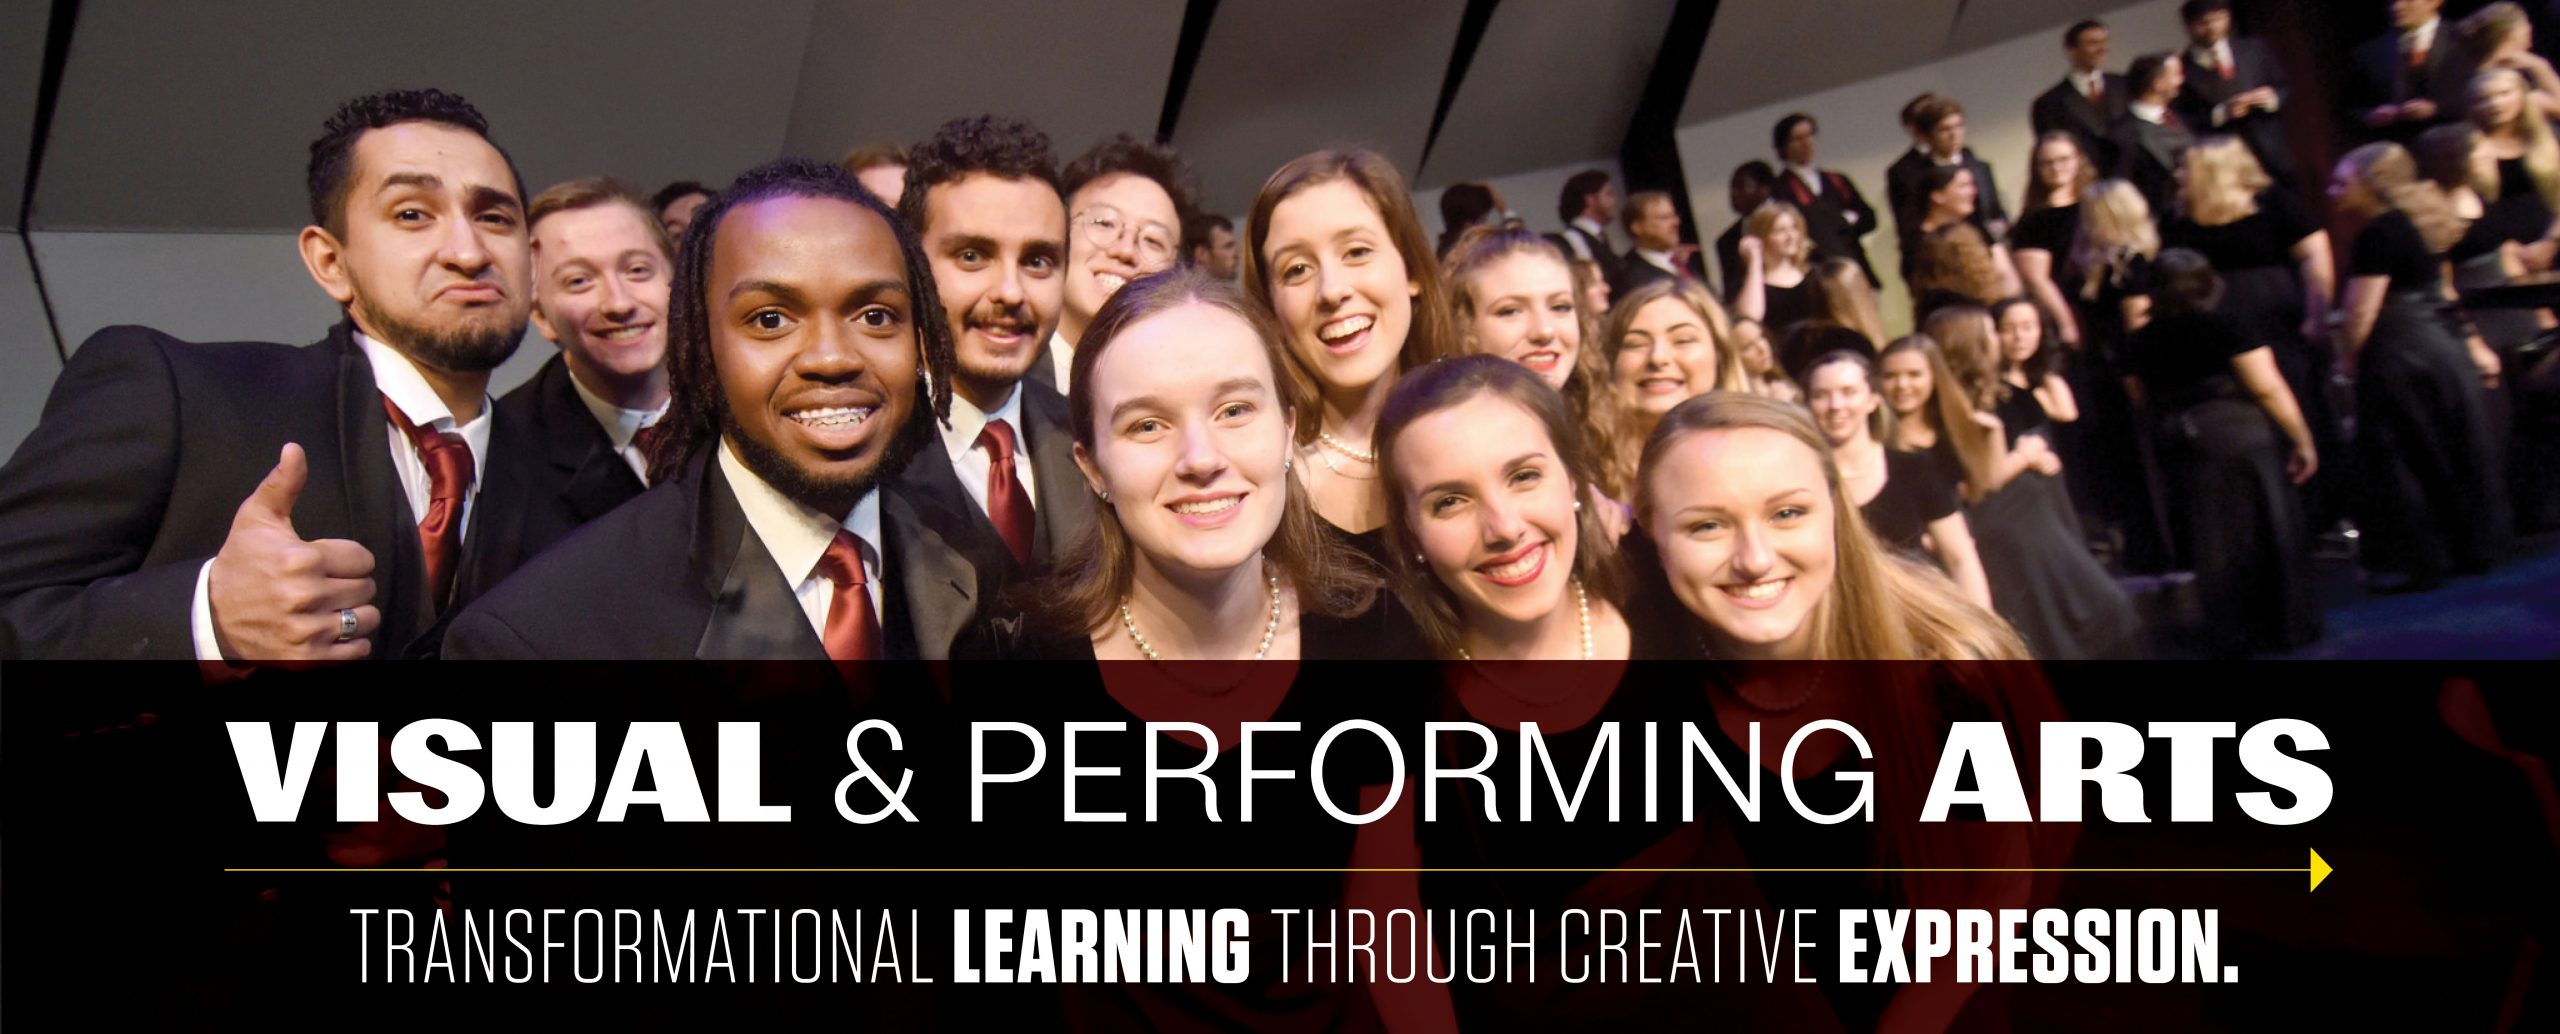 Group of Choral Activities students posing together with a graphic displayed over reading "Visual & Performing; Transformational Learning through Creative Expression"